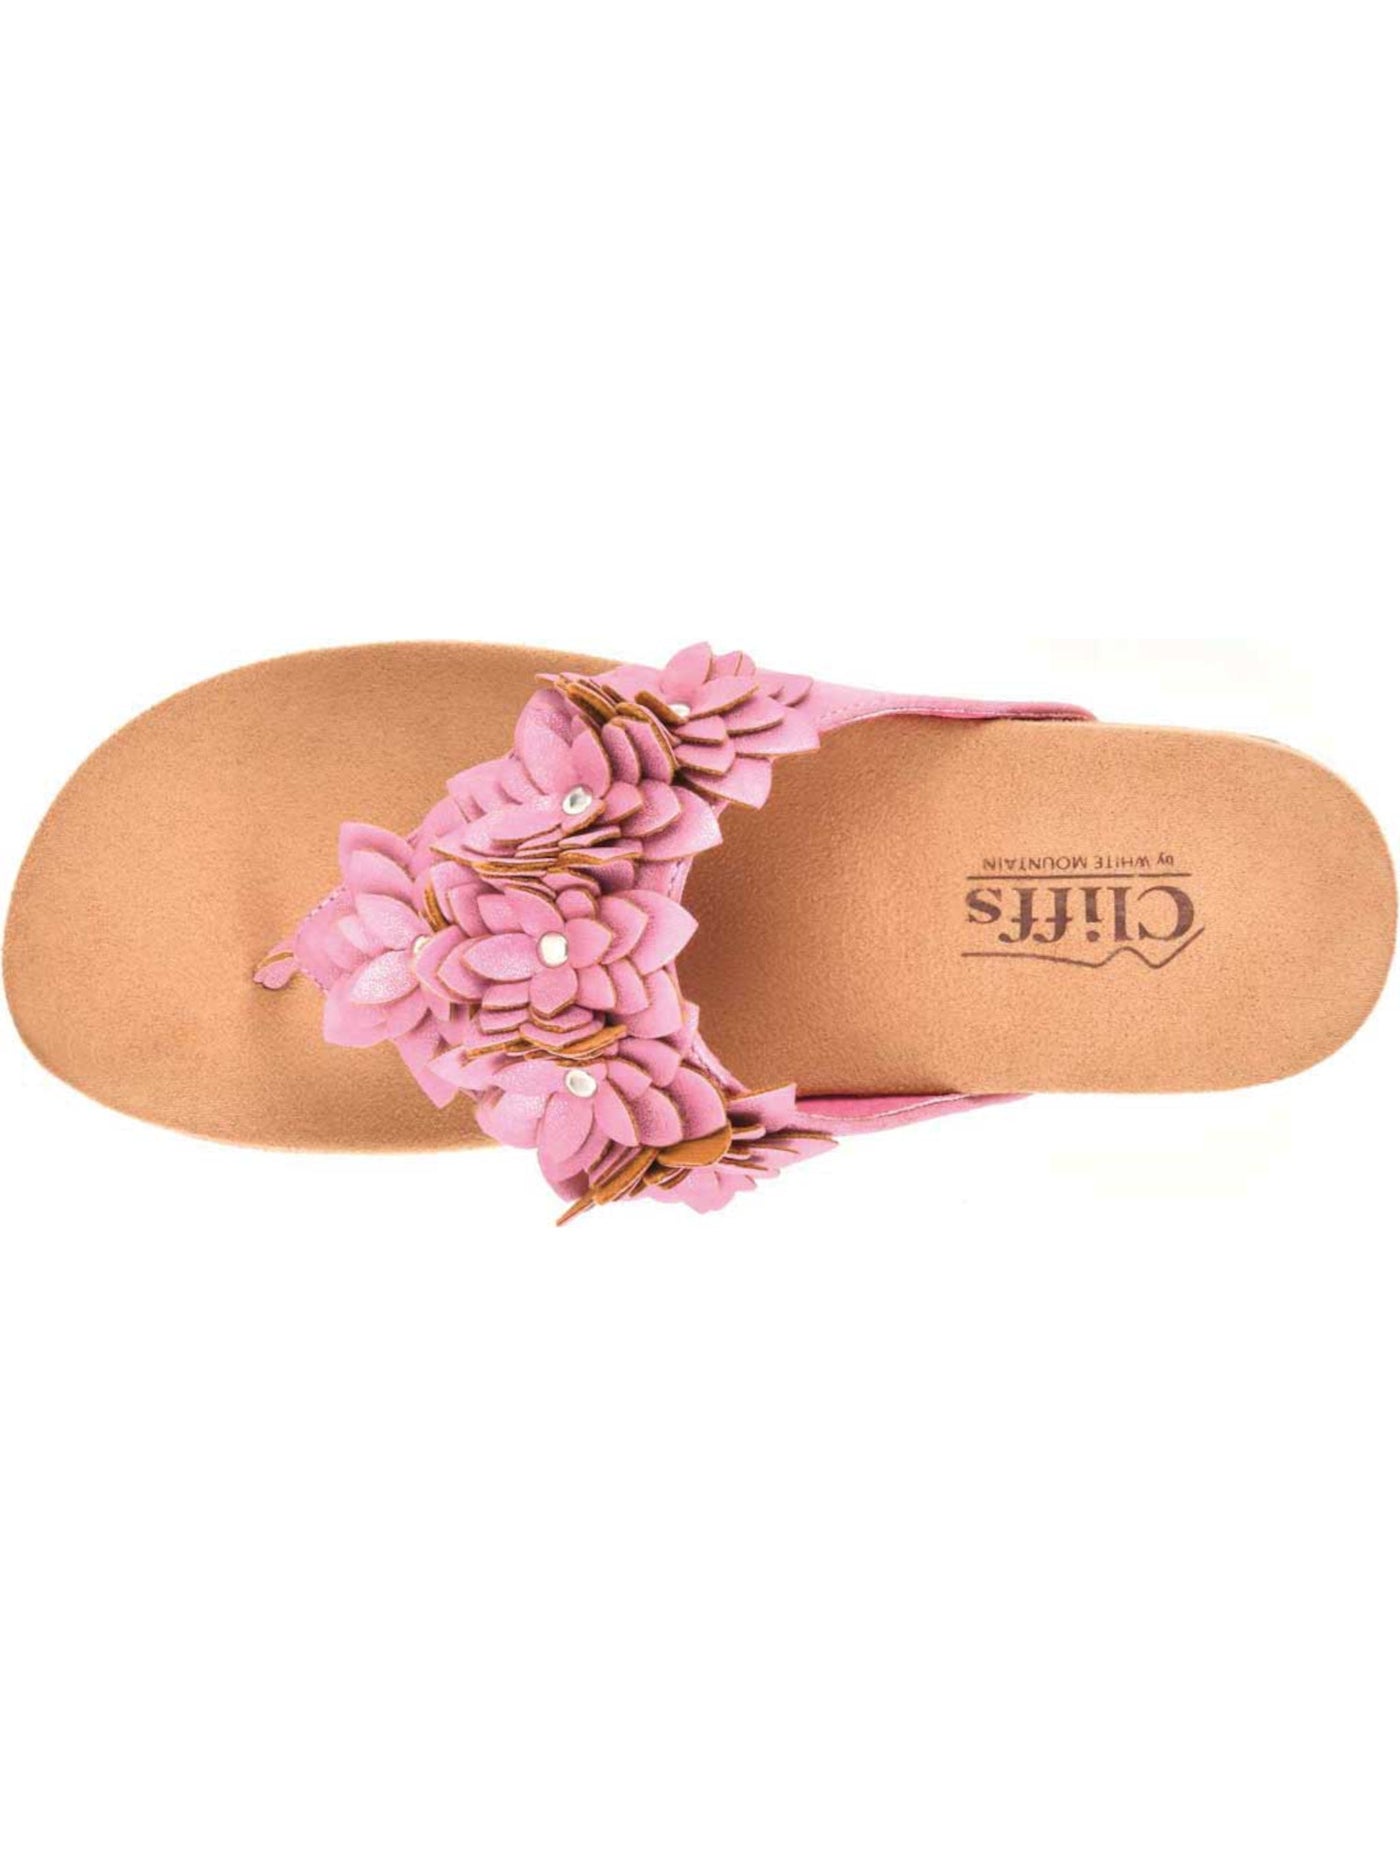 CLIFFS BY WHITE MOUNTAIN Womens Pink Sporty Floral Design Comfort Terris Round Toe Wedge Slip On Thong Sandals 9.5 M